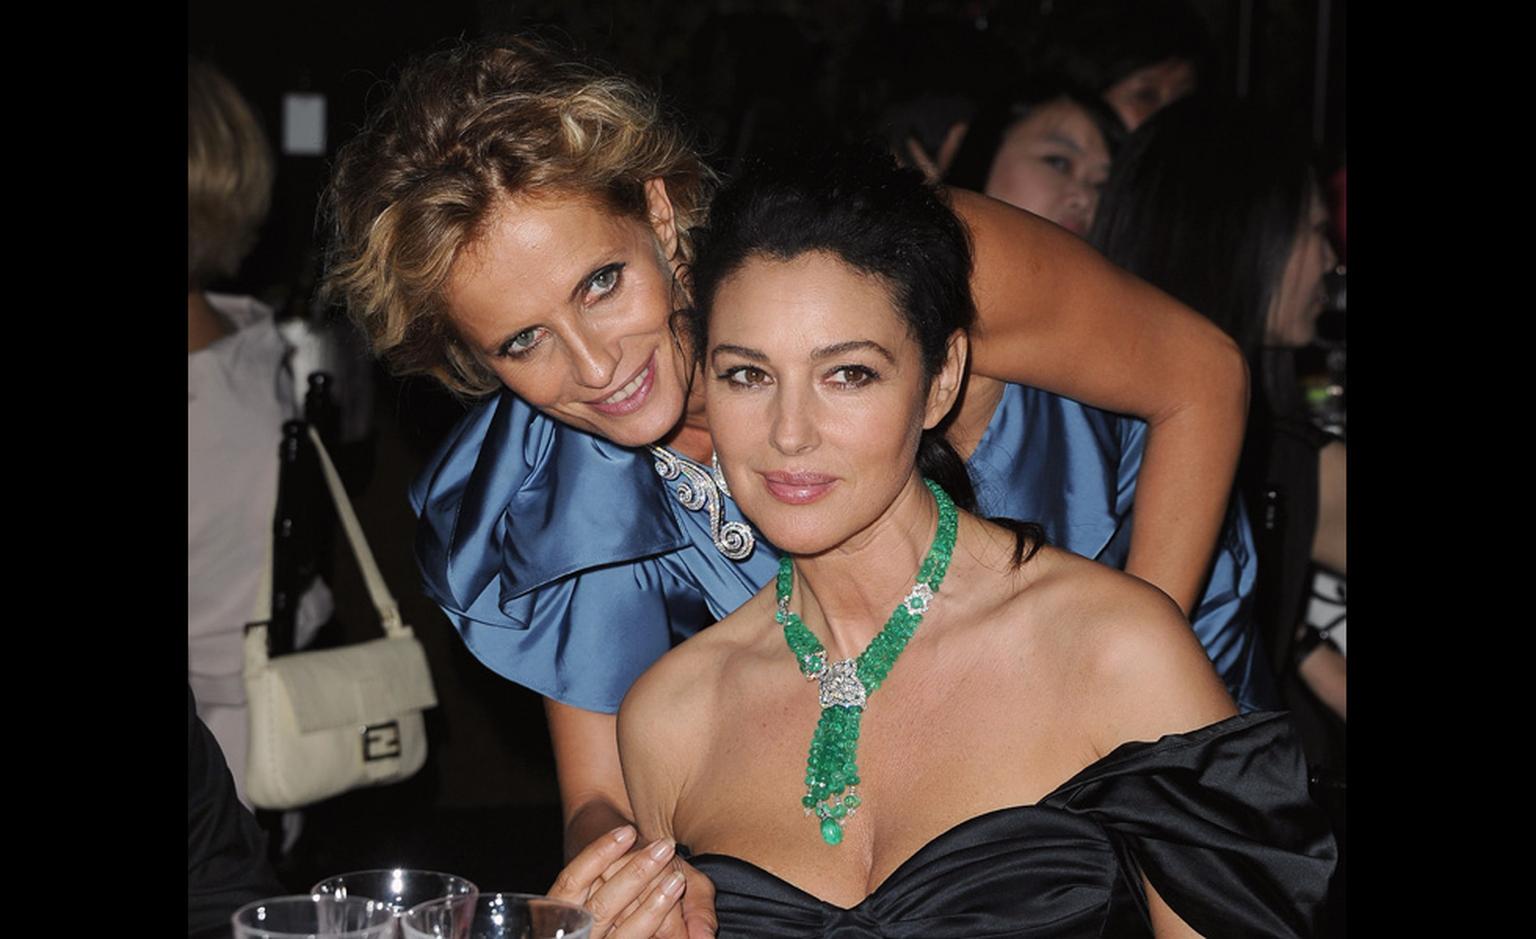 Isabella Ferrari with Monica Belluci at the dinner by chef Emanuele Scarello to celebrate the launch of Cartier's high jewellery collection.